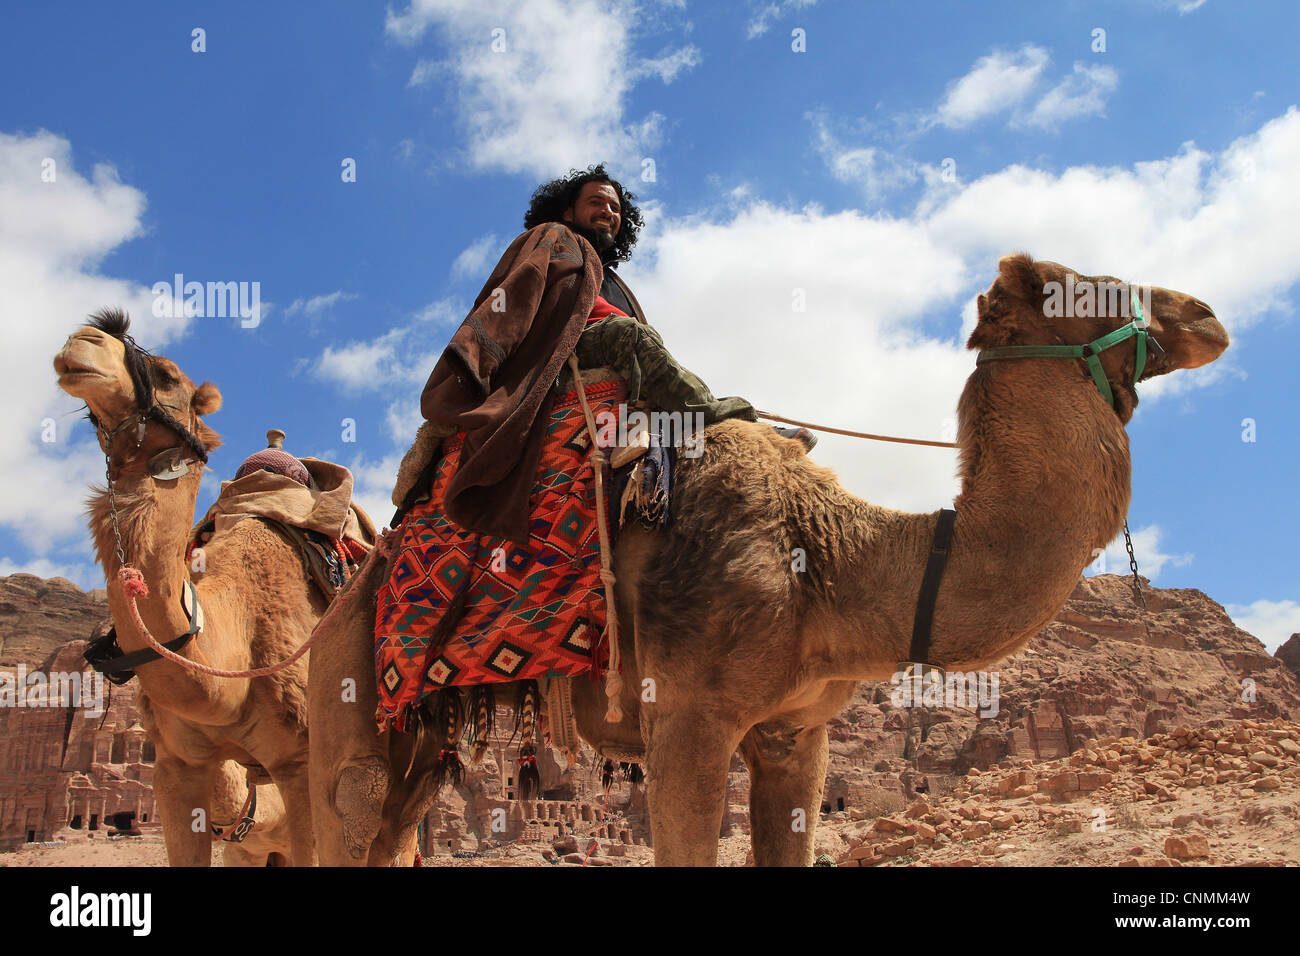 A Bedouin in front of the Royal tombs in Petra trying to hire tourists for a ride with his camels, Jordan. Stock Photo